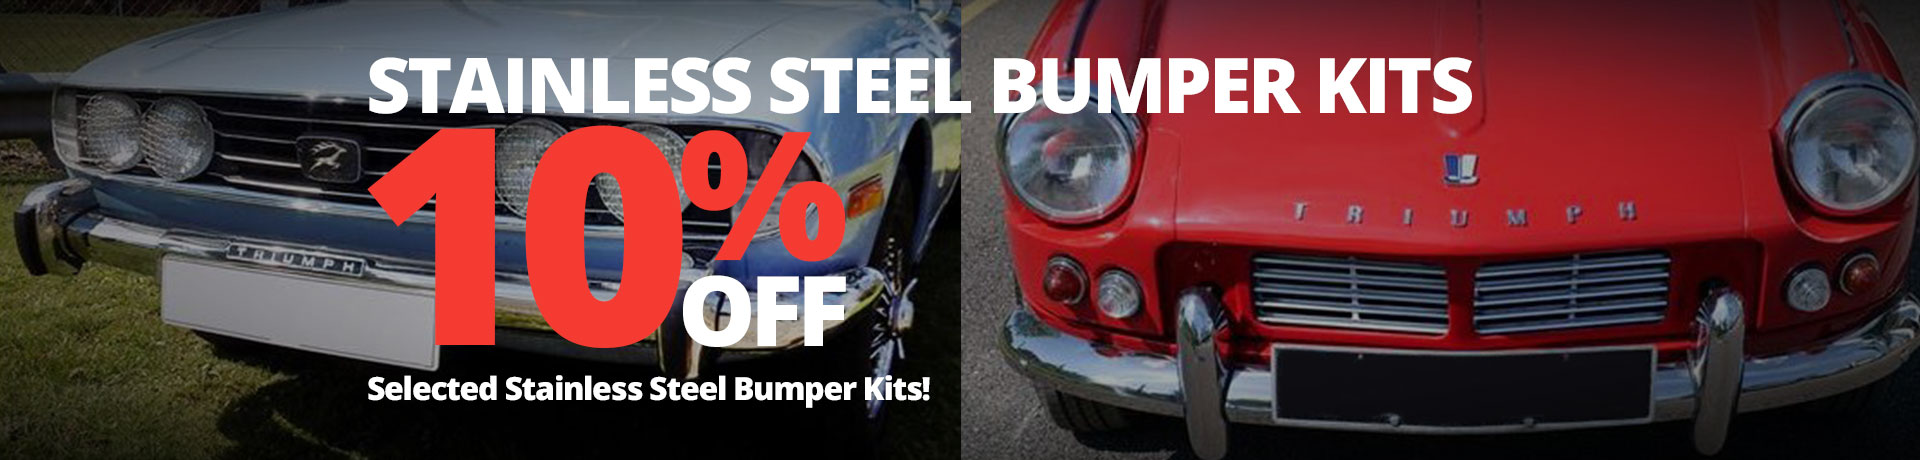 Save 10% on Stainless Steel Bumper Kits